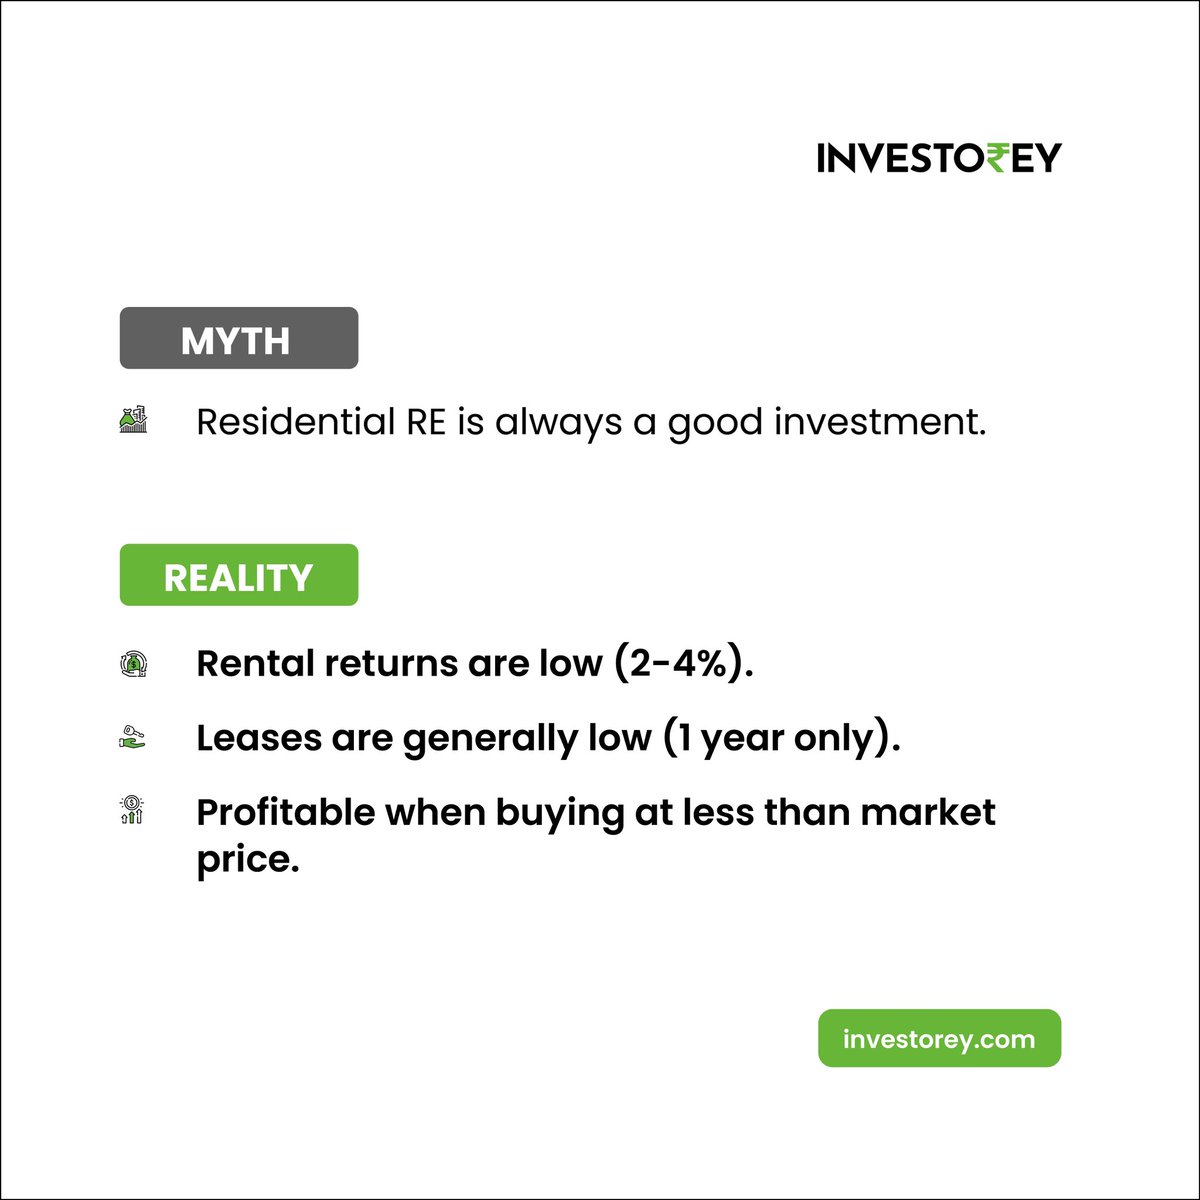 Well well well! 
We bet you didn't know this!
 .
.
.
#InvestWisely #realestatetips #investmentmanager #realestateinvestment #passiveincome #invest #investorey #income #finance #financialliteracy #financialplanning #financetips #financialfreedom